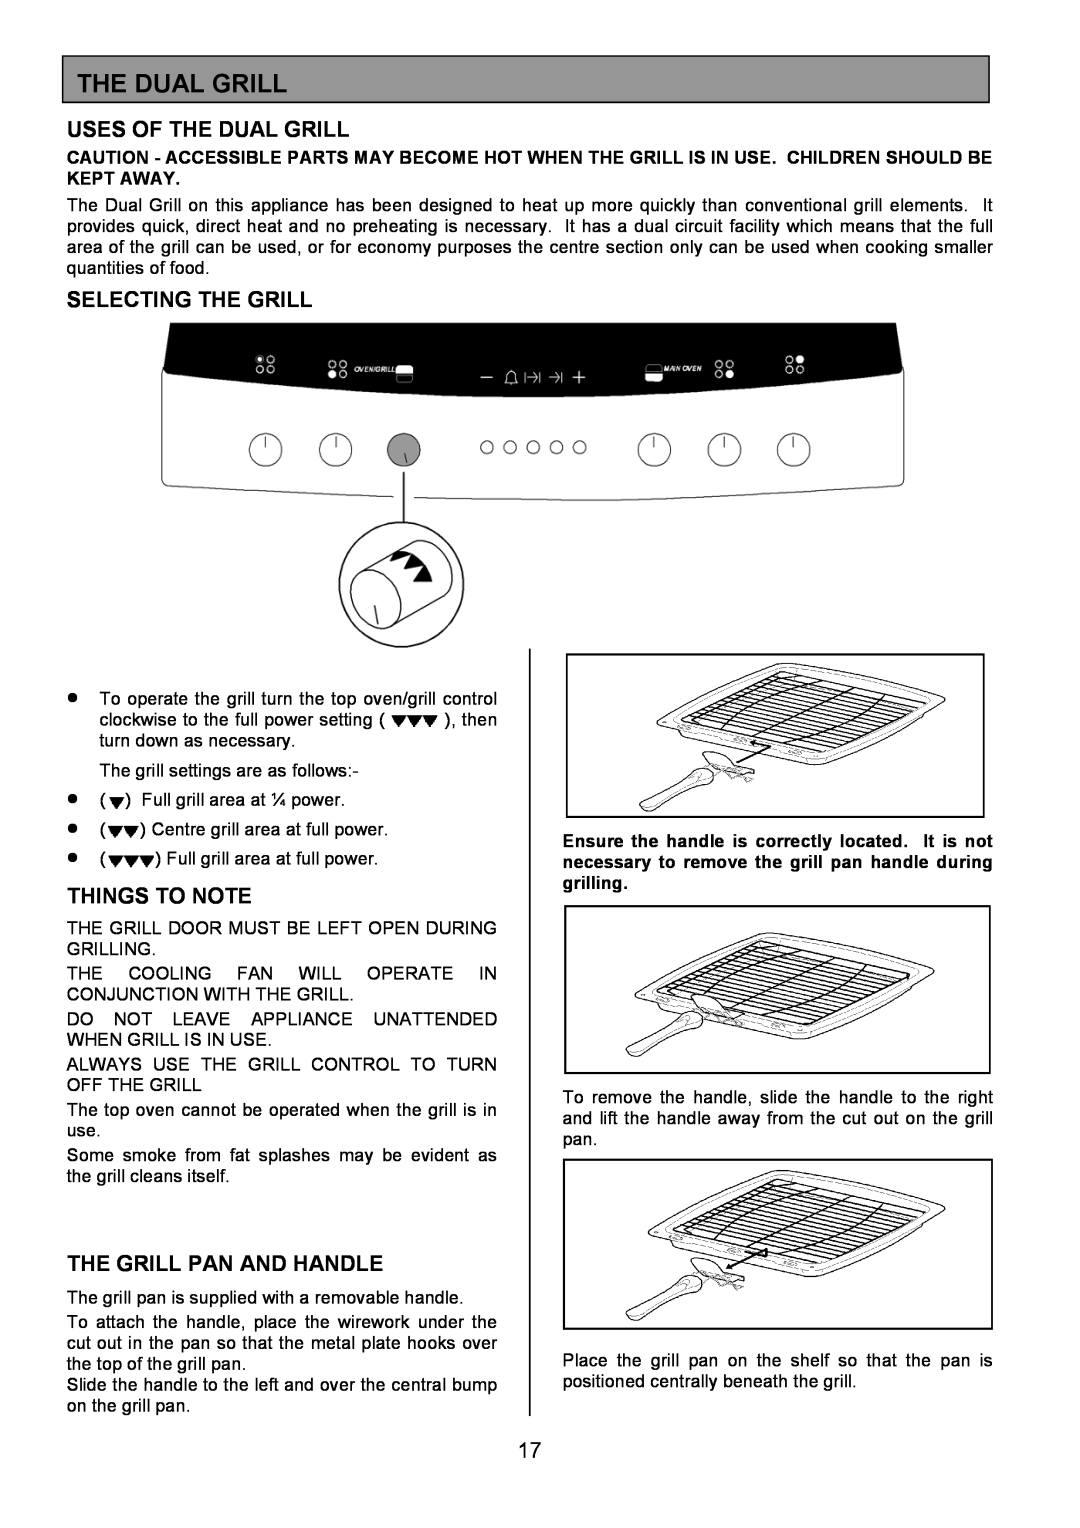 Zanussi ZCE 8021 manual Uses Of The Dual Grill, Selecting The Grill, Things To Note, The Grill Pan And Handle 